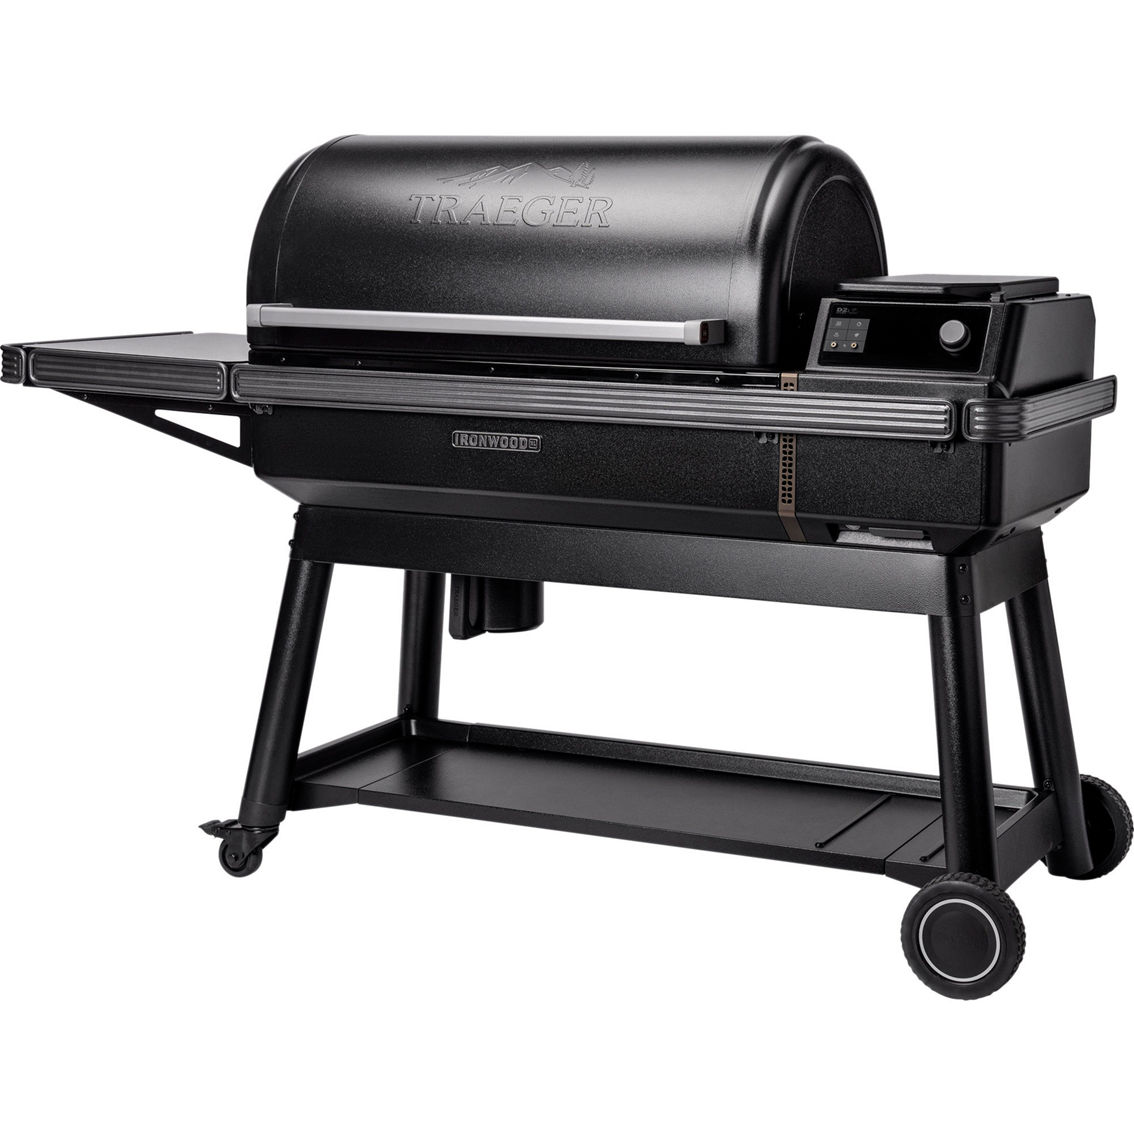 Traeger New Ironwood XL Wood Pellet Grill - Image 1 of 6